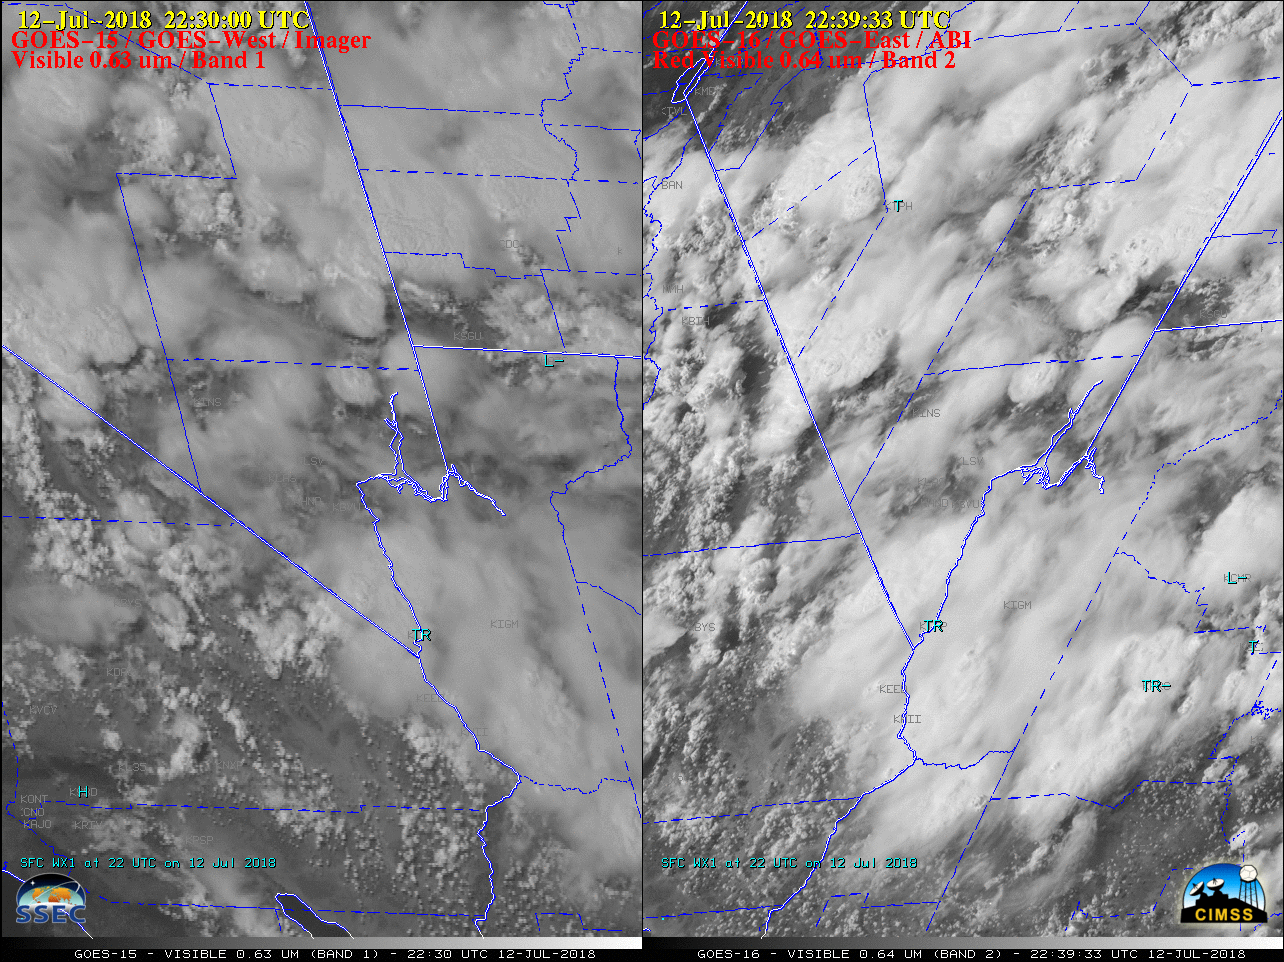 GOES-15 Visible (0.63 µm, left) and GOES-16 Visible (0.64 µm, right) images [click to play MP4 animation]